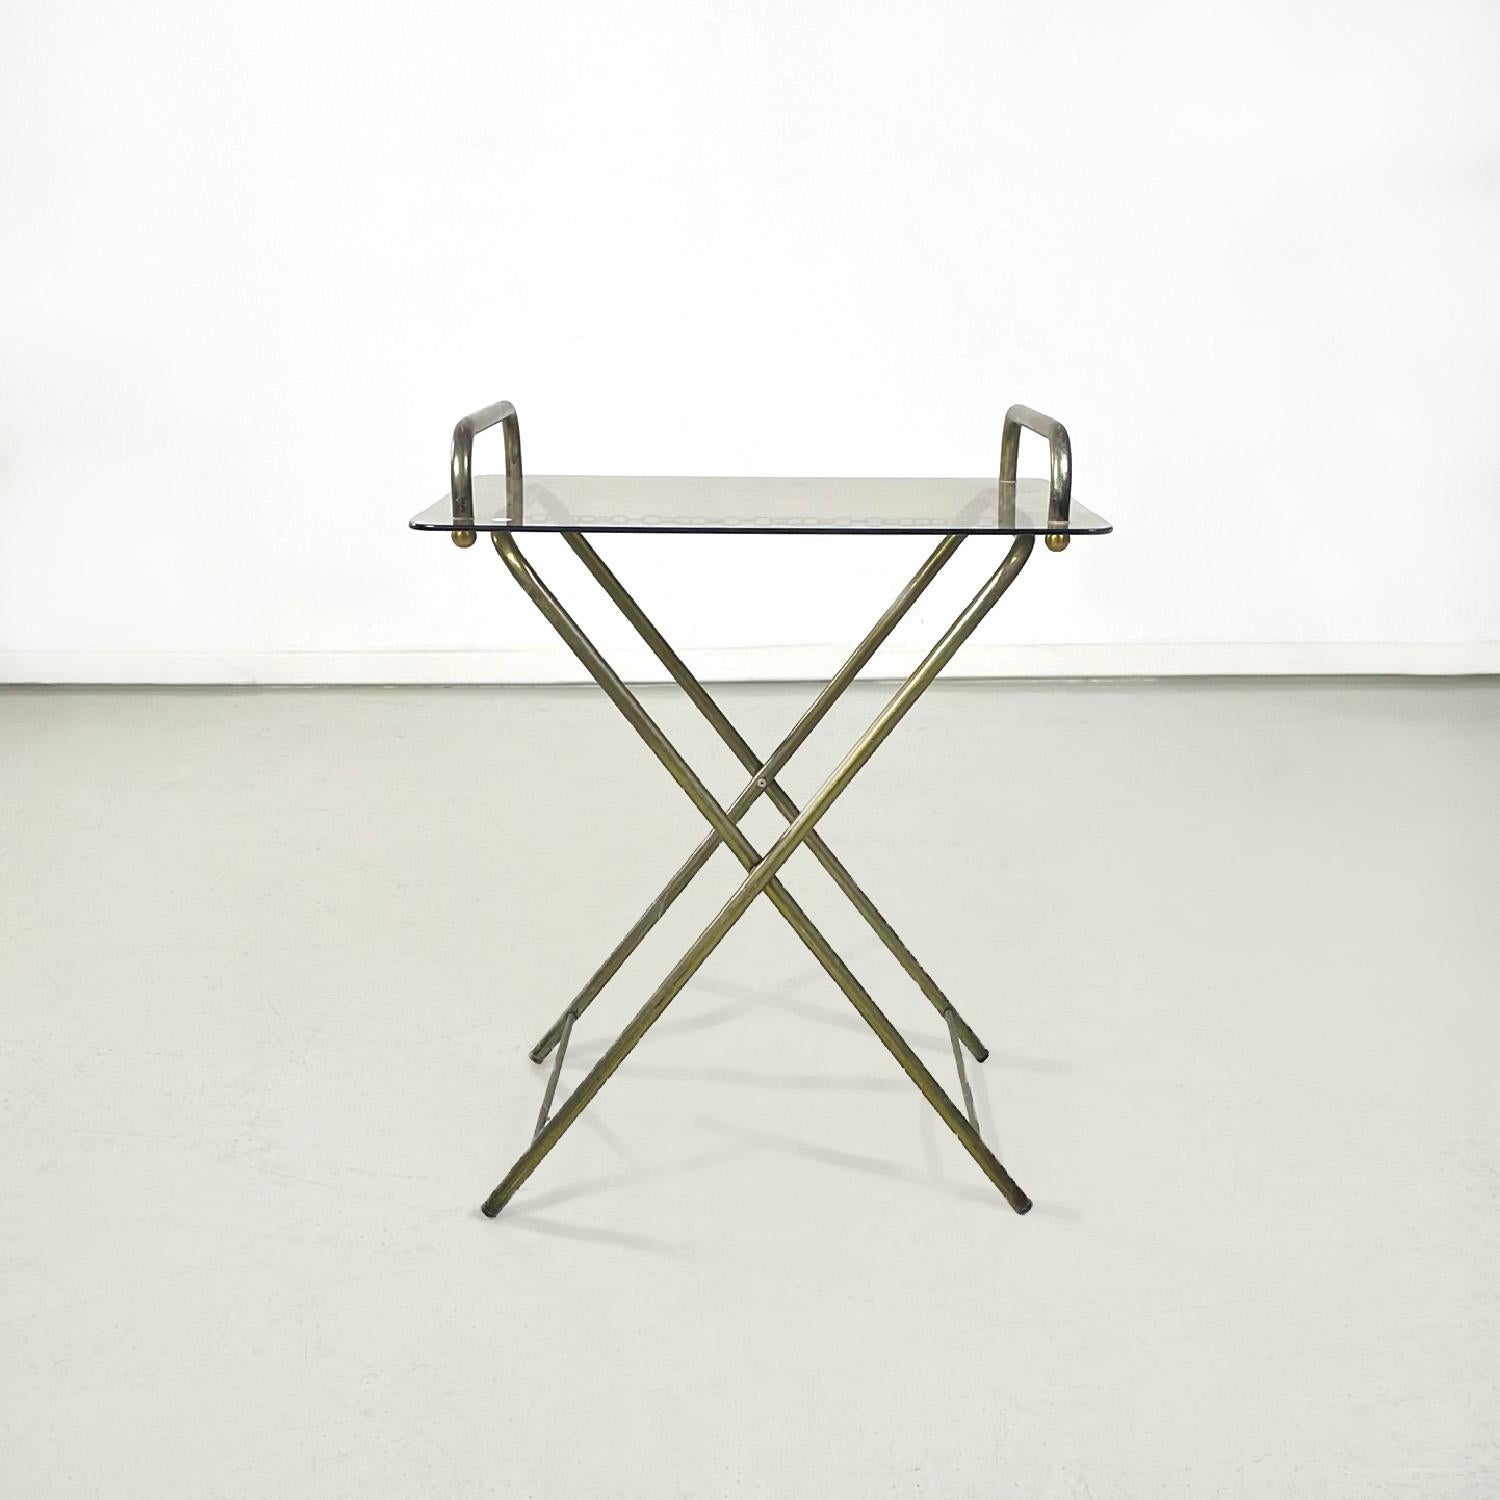 Italian mid-century modern brass structure and crystal top service table, 1960s
Rectangular service or coffee table. The structure is in brass rod and is foldable, it has a small chain that blocks it. The top is in colored crystal, it has two brass